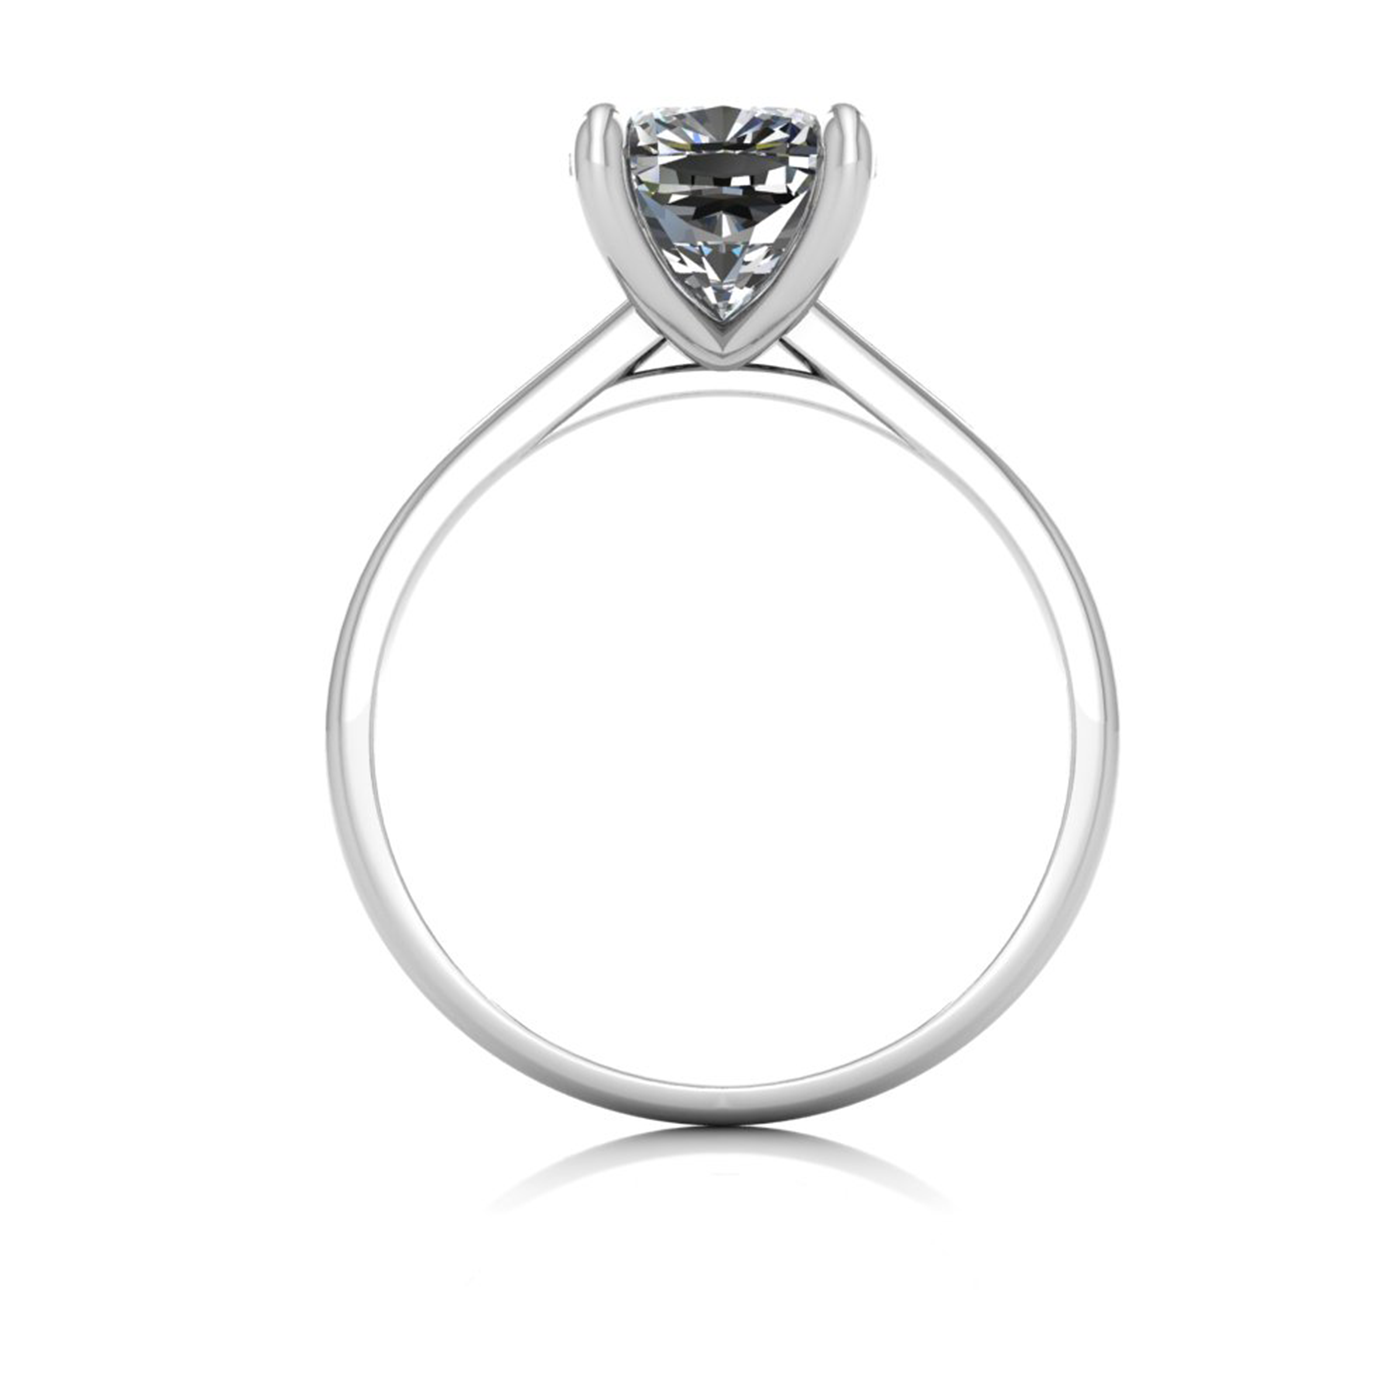 18k white gold 2.5ct 4 prongs solitaire cushion cut diamond engagement ring with whisper thin band